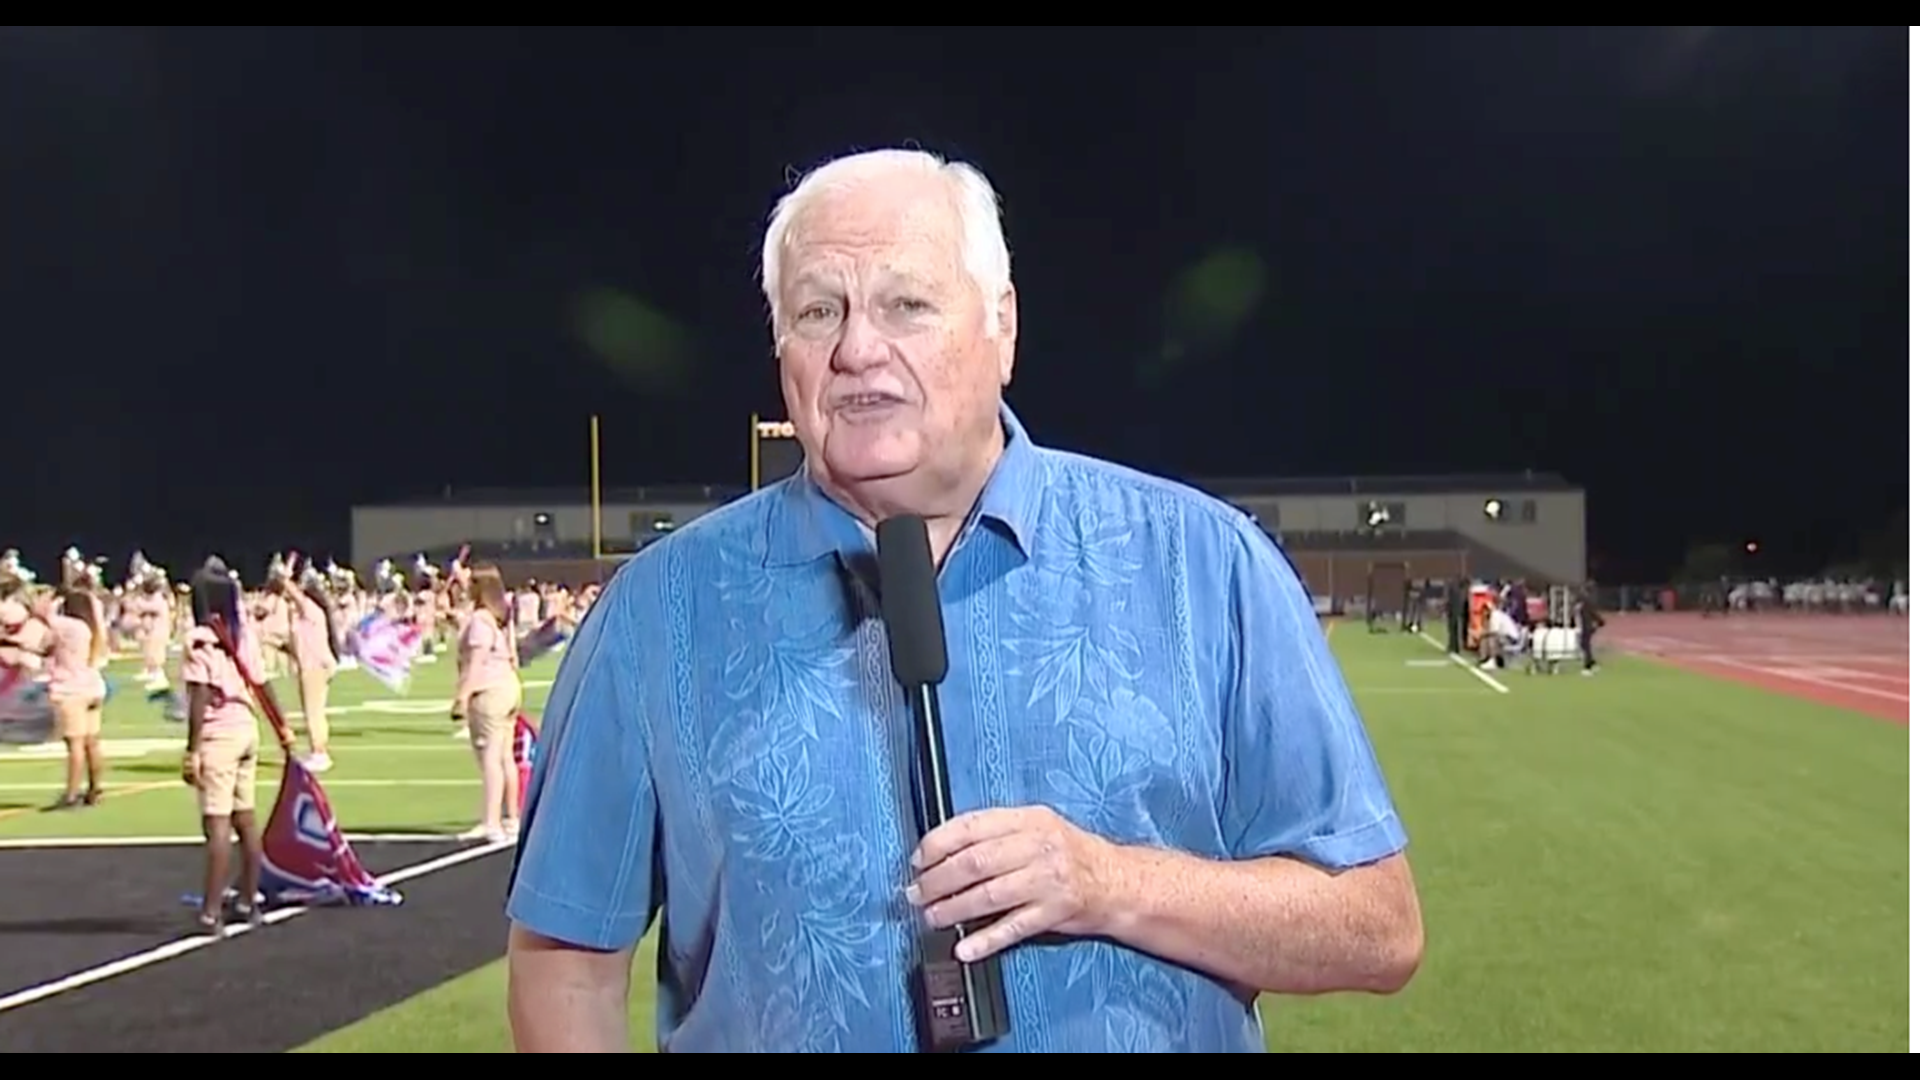 It’s week one of the high school football season and Dale Hansen is at our game of the week, Duncanville vs. Lancaster. He gives a halftime recap of the football matchup.